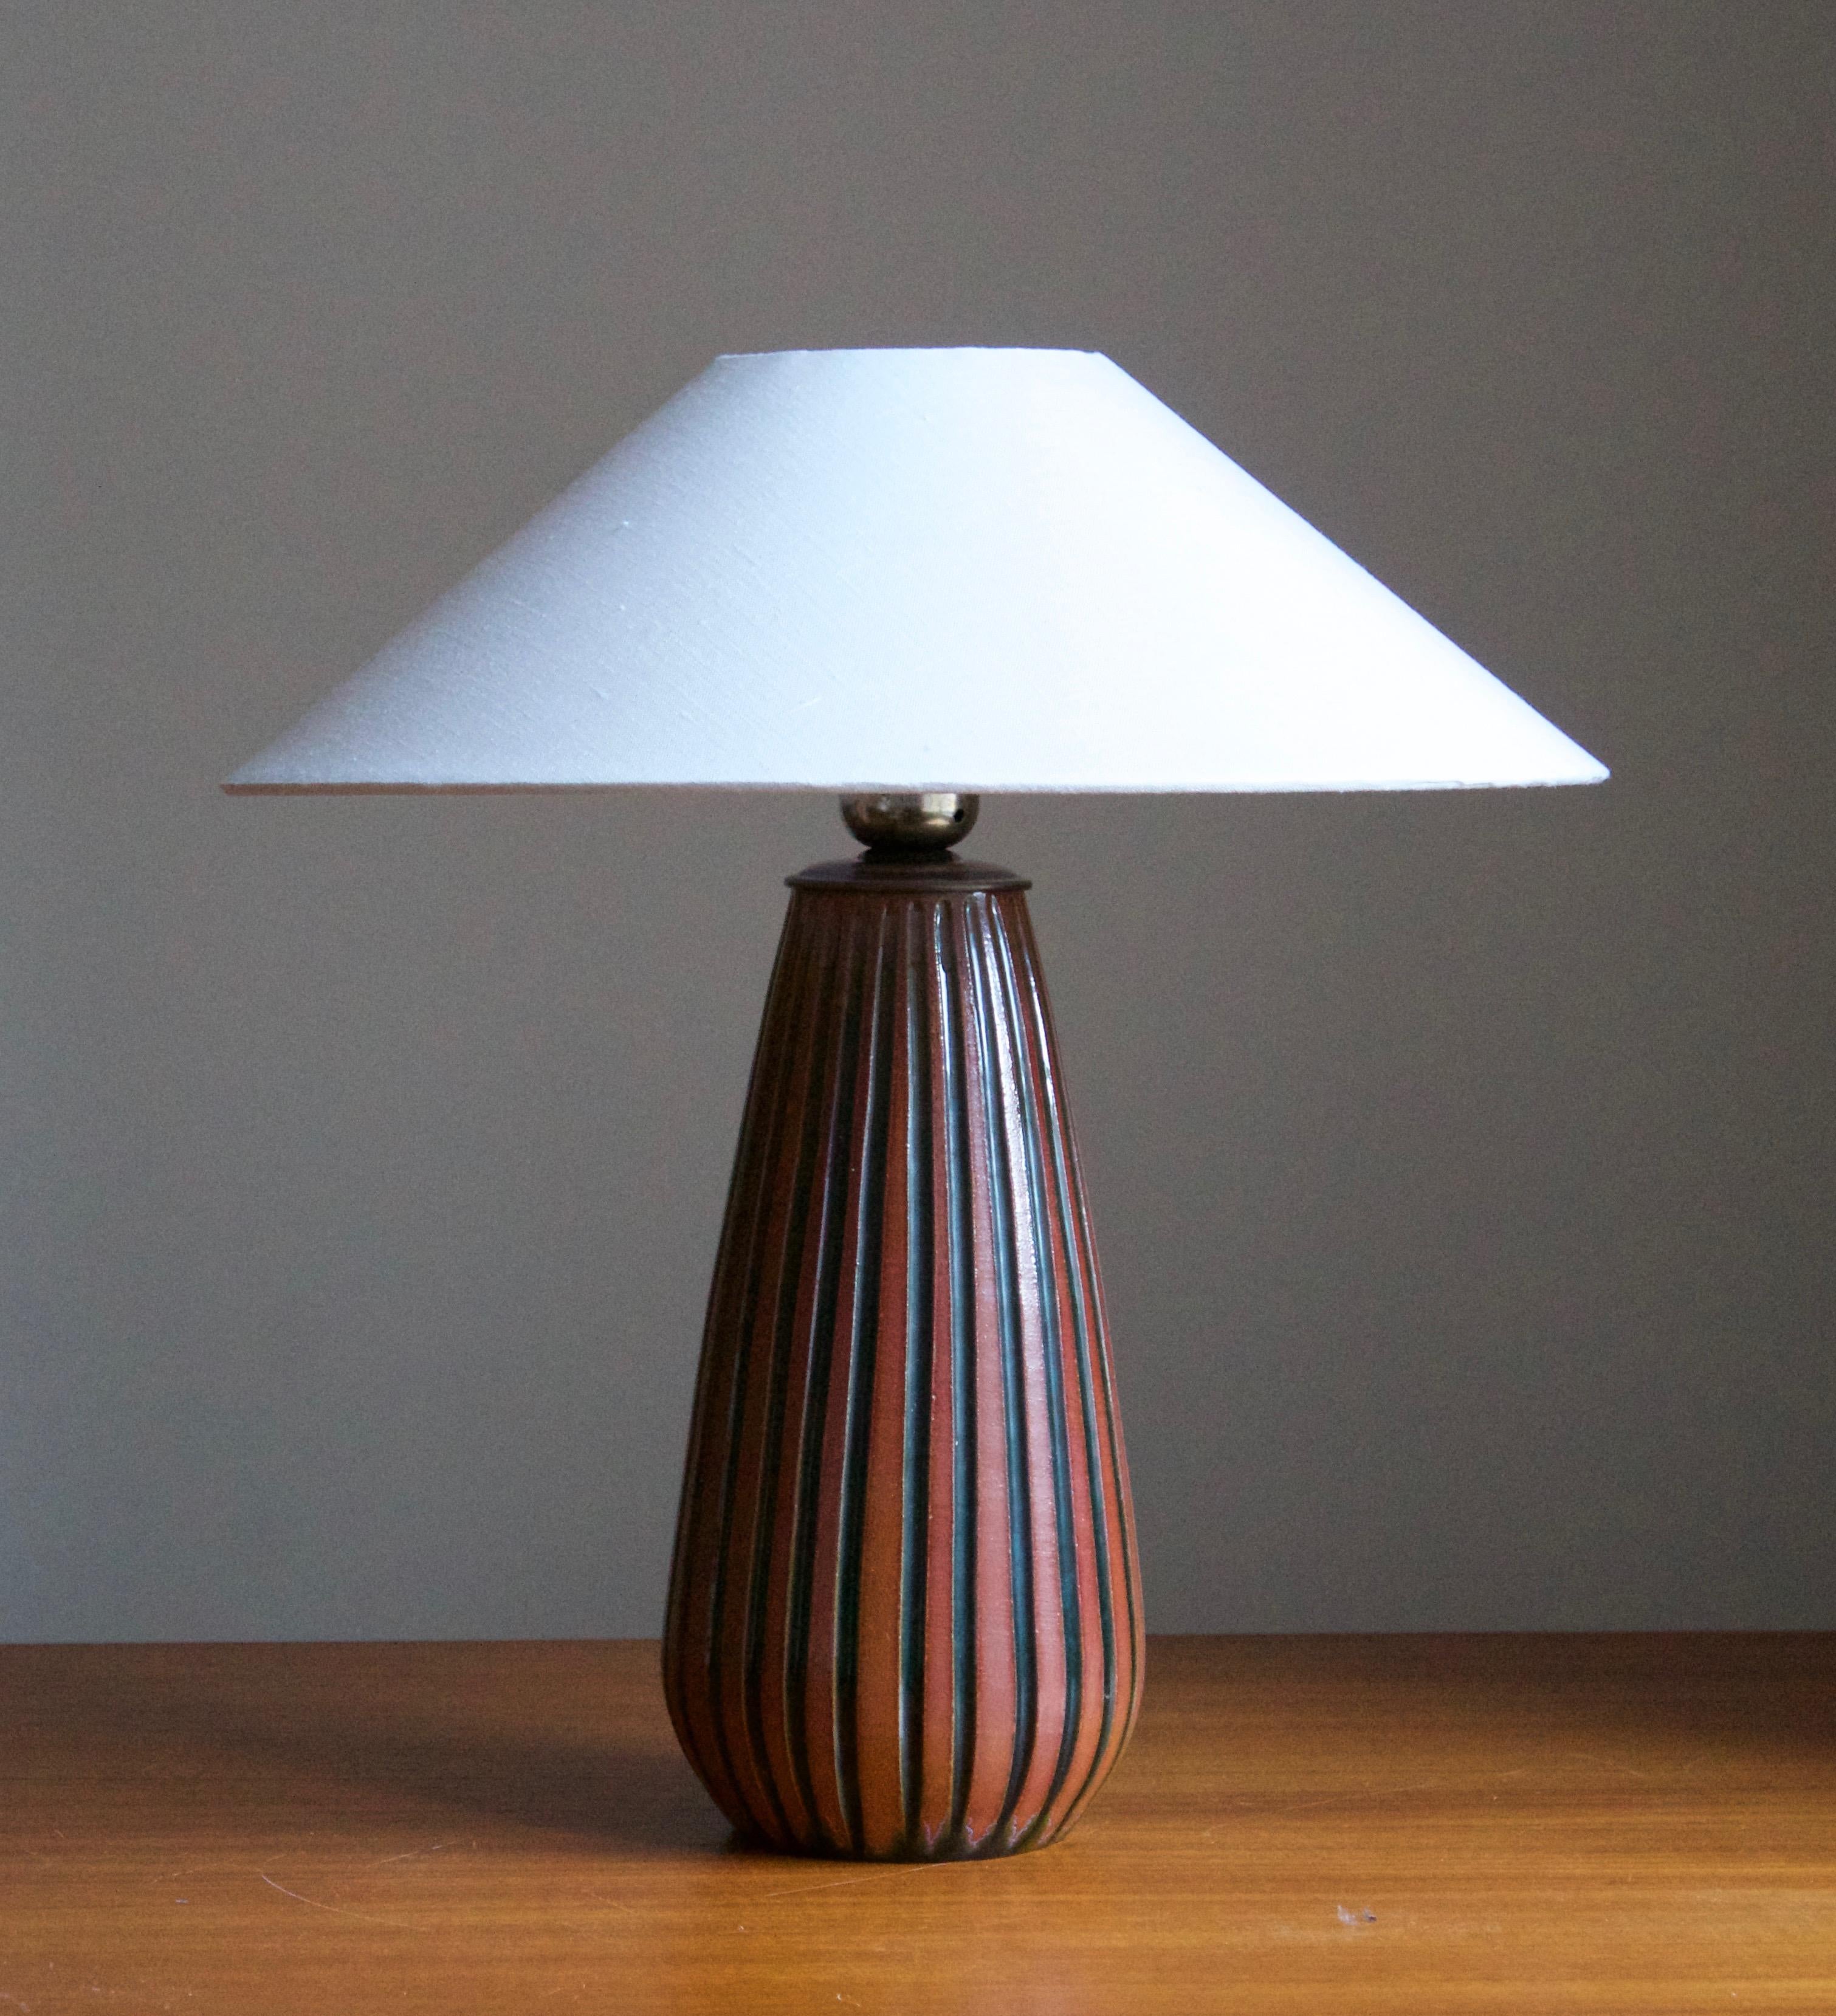 A table lamp, on a fluted black / red ceramic base designed by Ingrid Atterberg for Upsala Ekeby, Sweden, 1950s.

Sold without lampshade. Stated dimensions exclude lampshade. Height includes socket.

Glaze features a brown color.